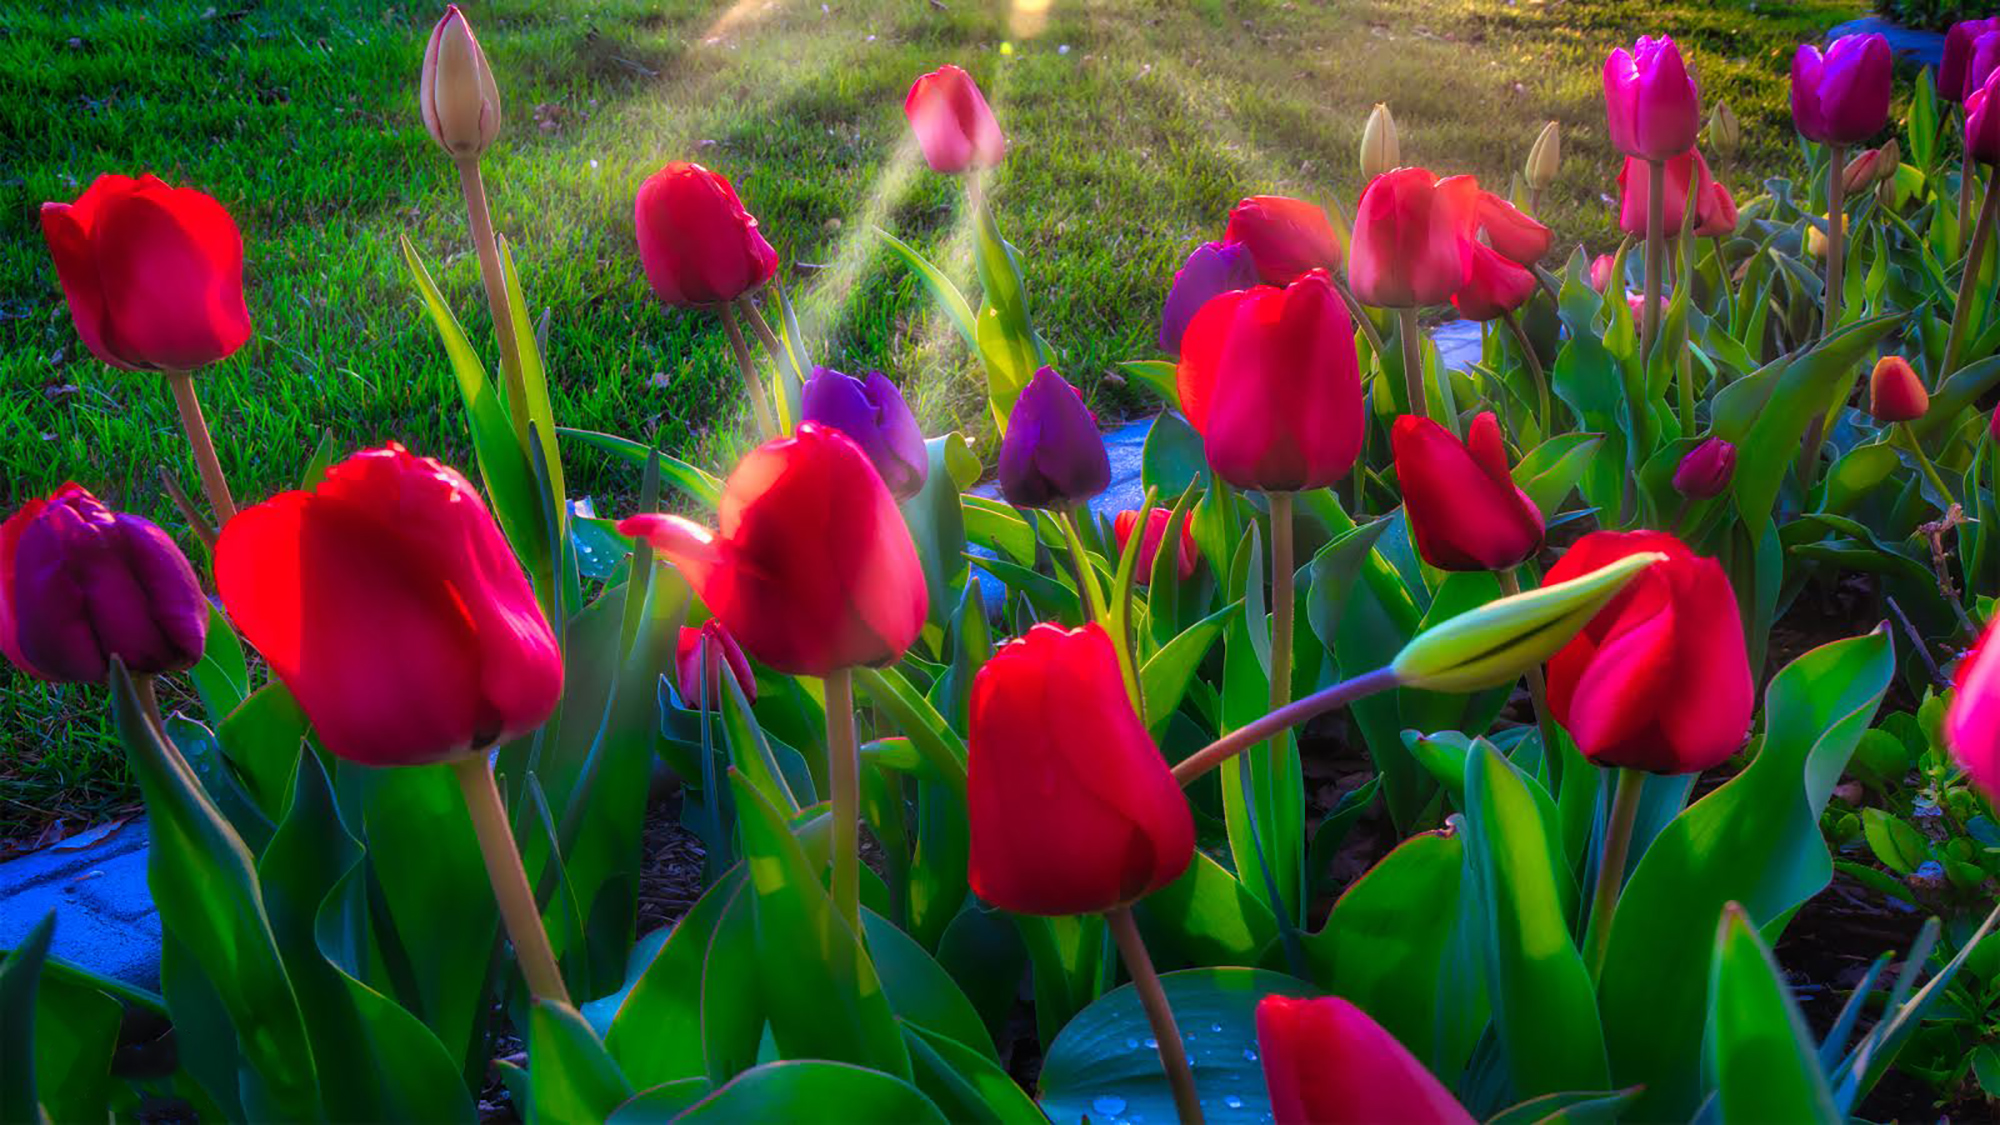 Tulips at Sunset by Skip Weeks